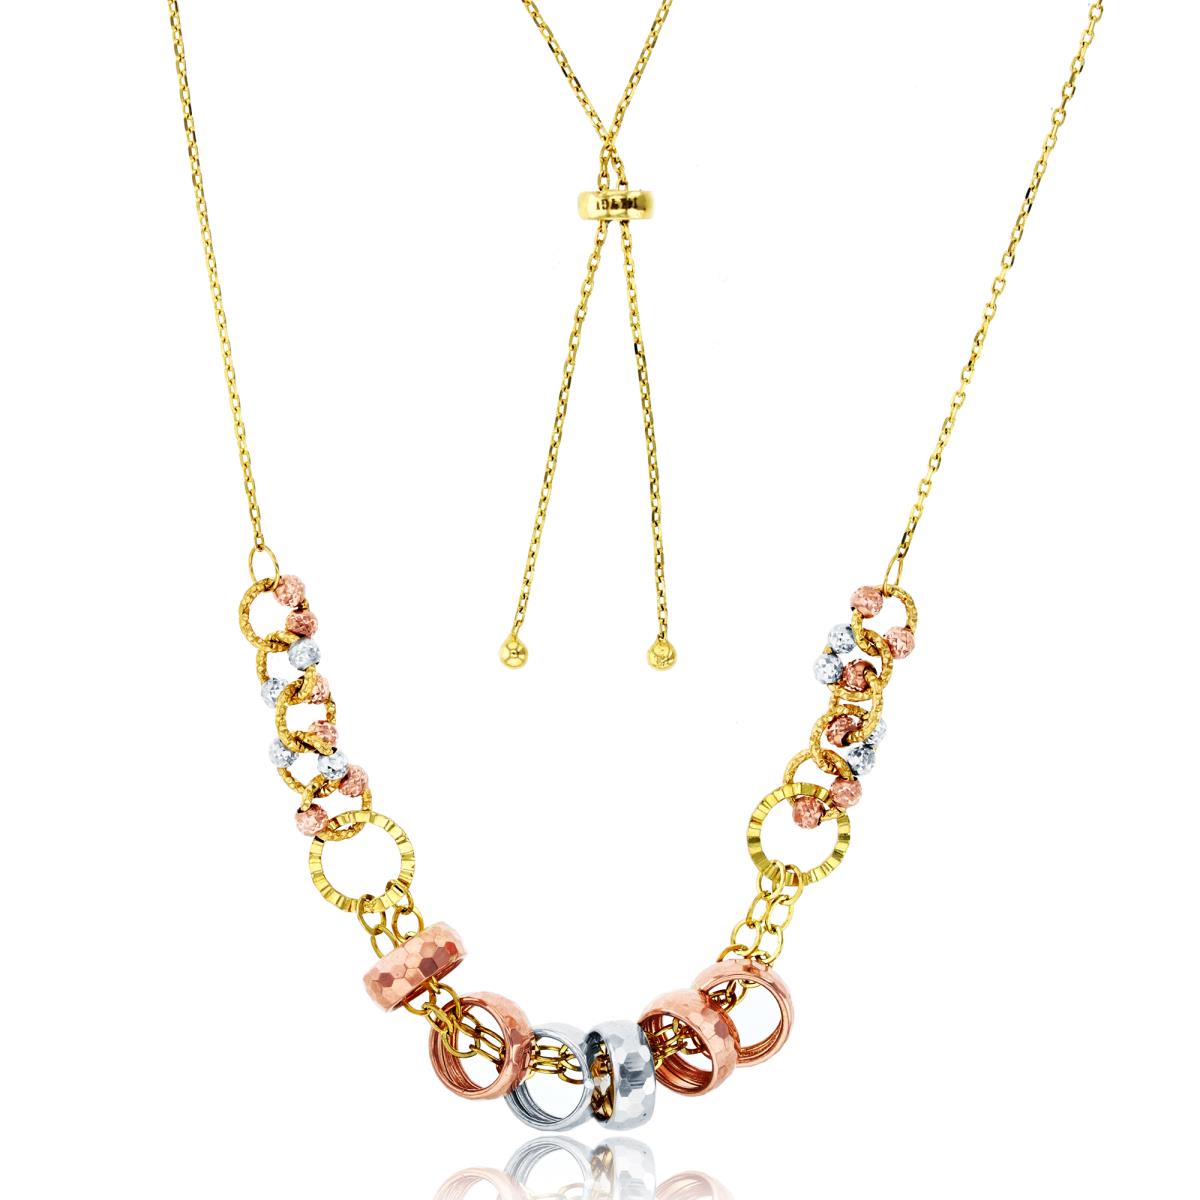 14K Tri-Color Gold Diamond Cut Beads & Rings Adjustable Necklace